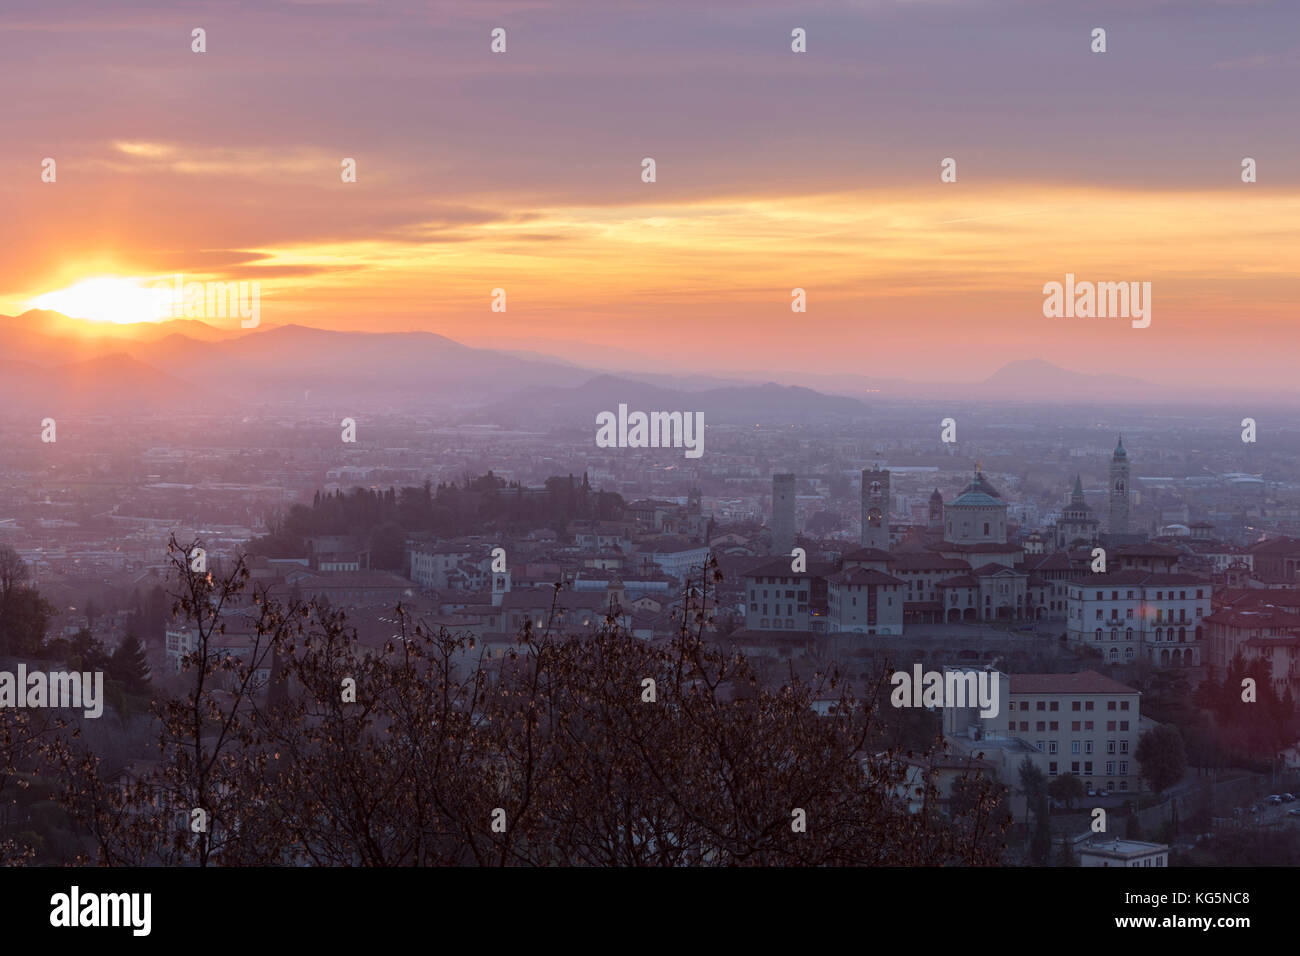 View of the medieval old town called Città Alta on hilltop framed by the fiery orange sky at dawn Bergamo Lombardy Italy Europe Stock Photo